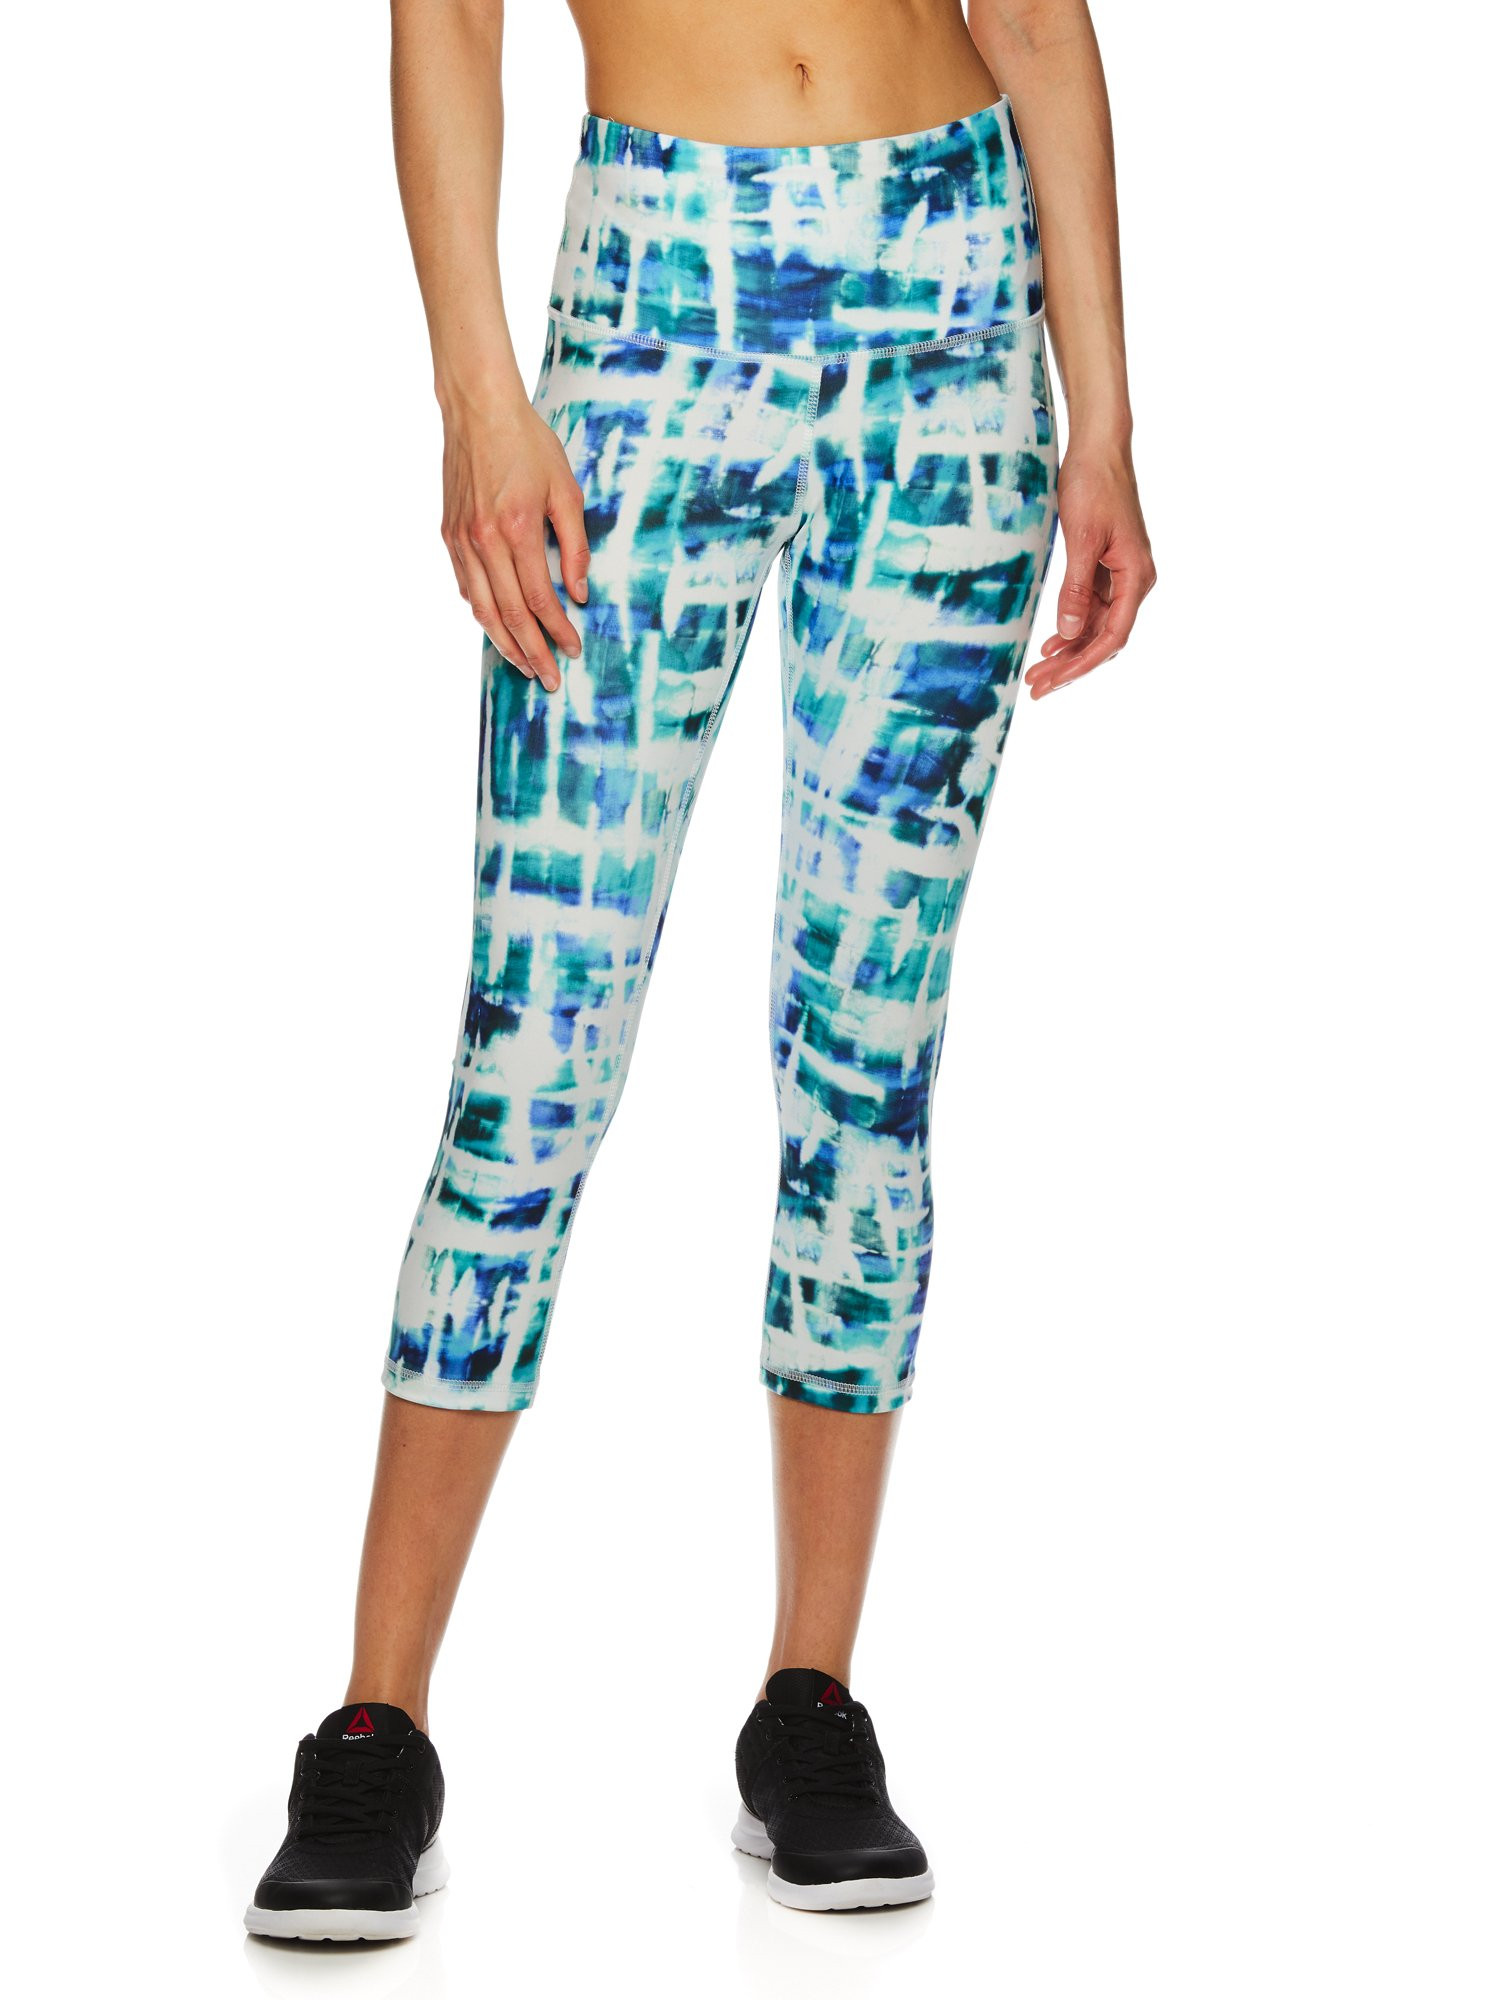 These athletic capris are the perfect fitted capri for when you want to add some fun and color to your athleisure wardrobe. Product Features VERSATILE: Reebok high waisted workout capris are perfect for yoga, running, and everything in between. Never miss #capri